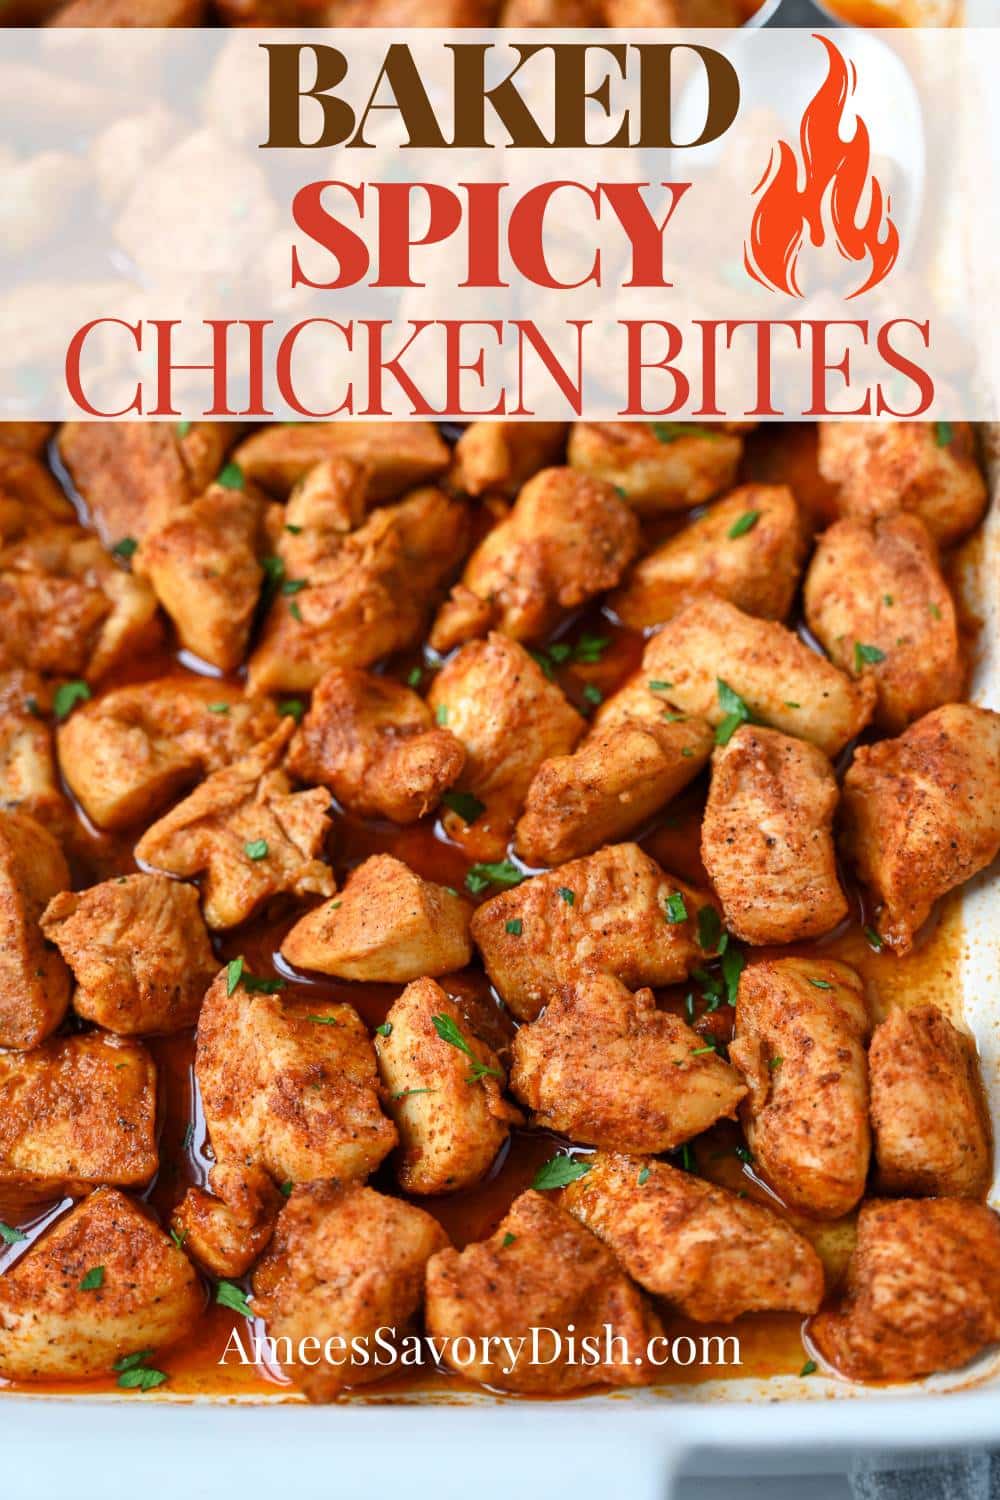 Tender and juicy bite-size chicken bites tossed in a flavorful spice mixture with a bit of heat. via @Ameessavorydish